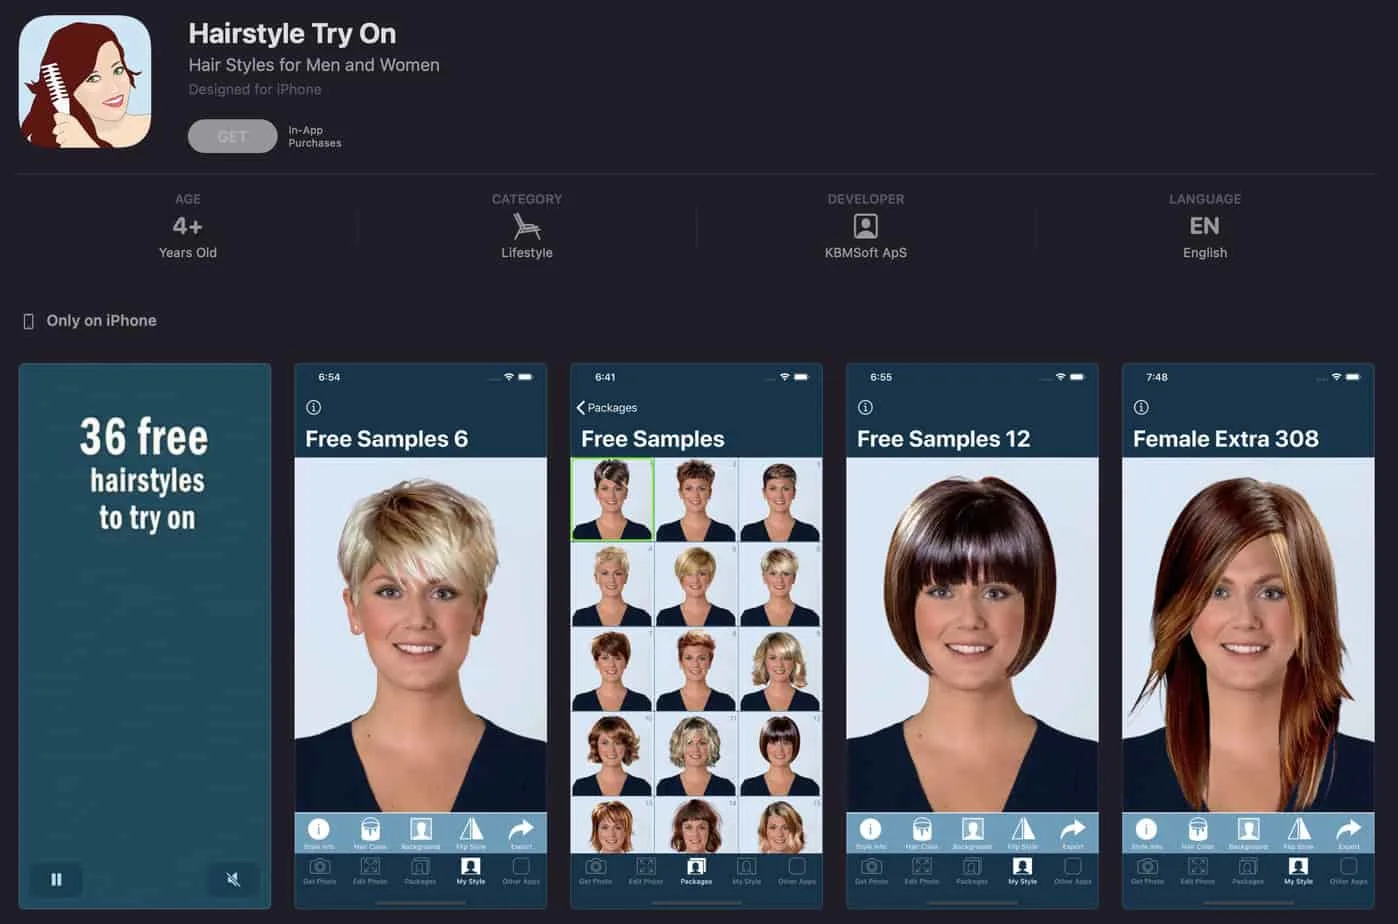 Hairstyle Changer  Change Your Hairstyle Instantly with AI  AILab Tools